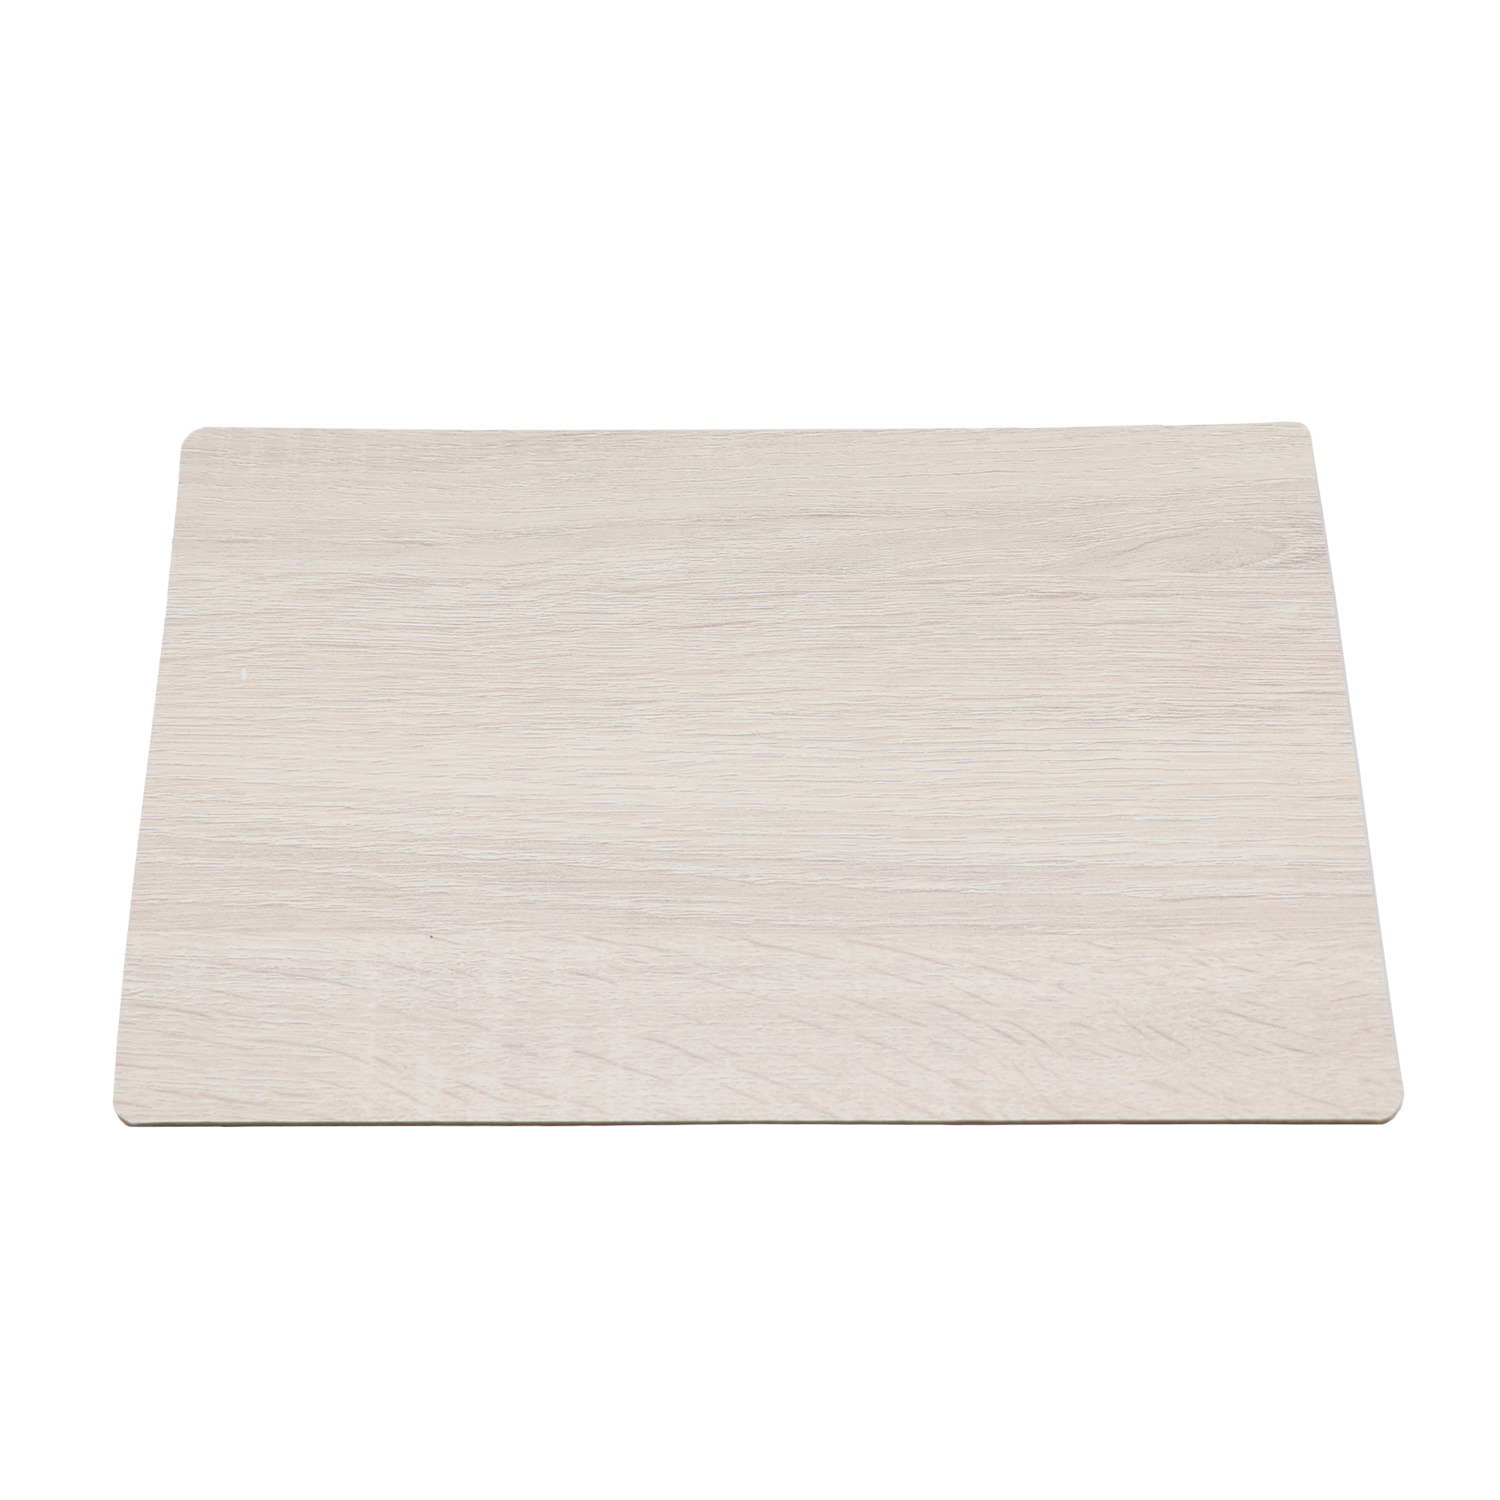 Melamine Particle Board/Chip Board for Decorative or Furniture